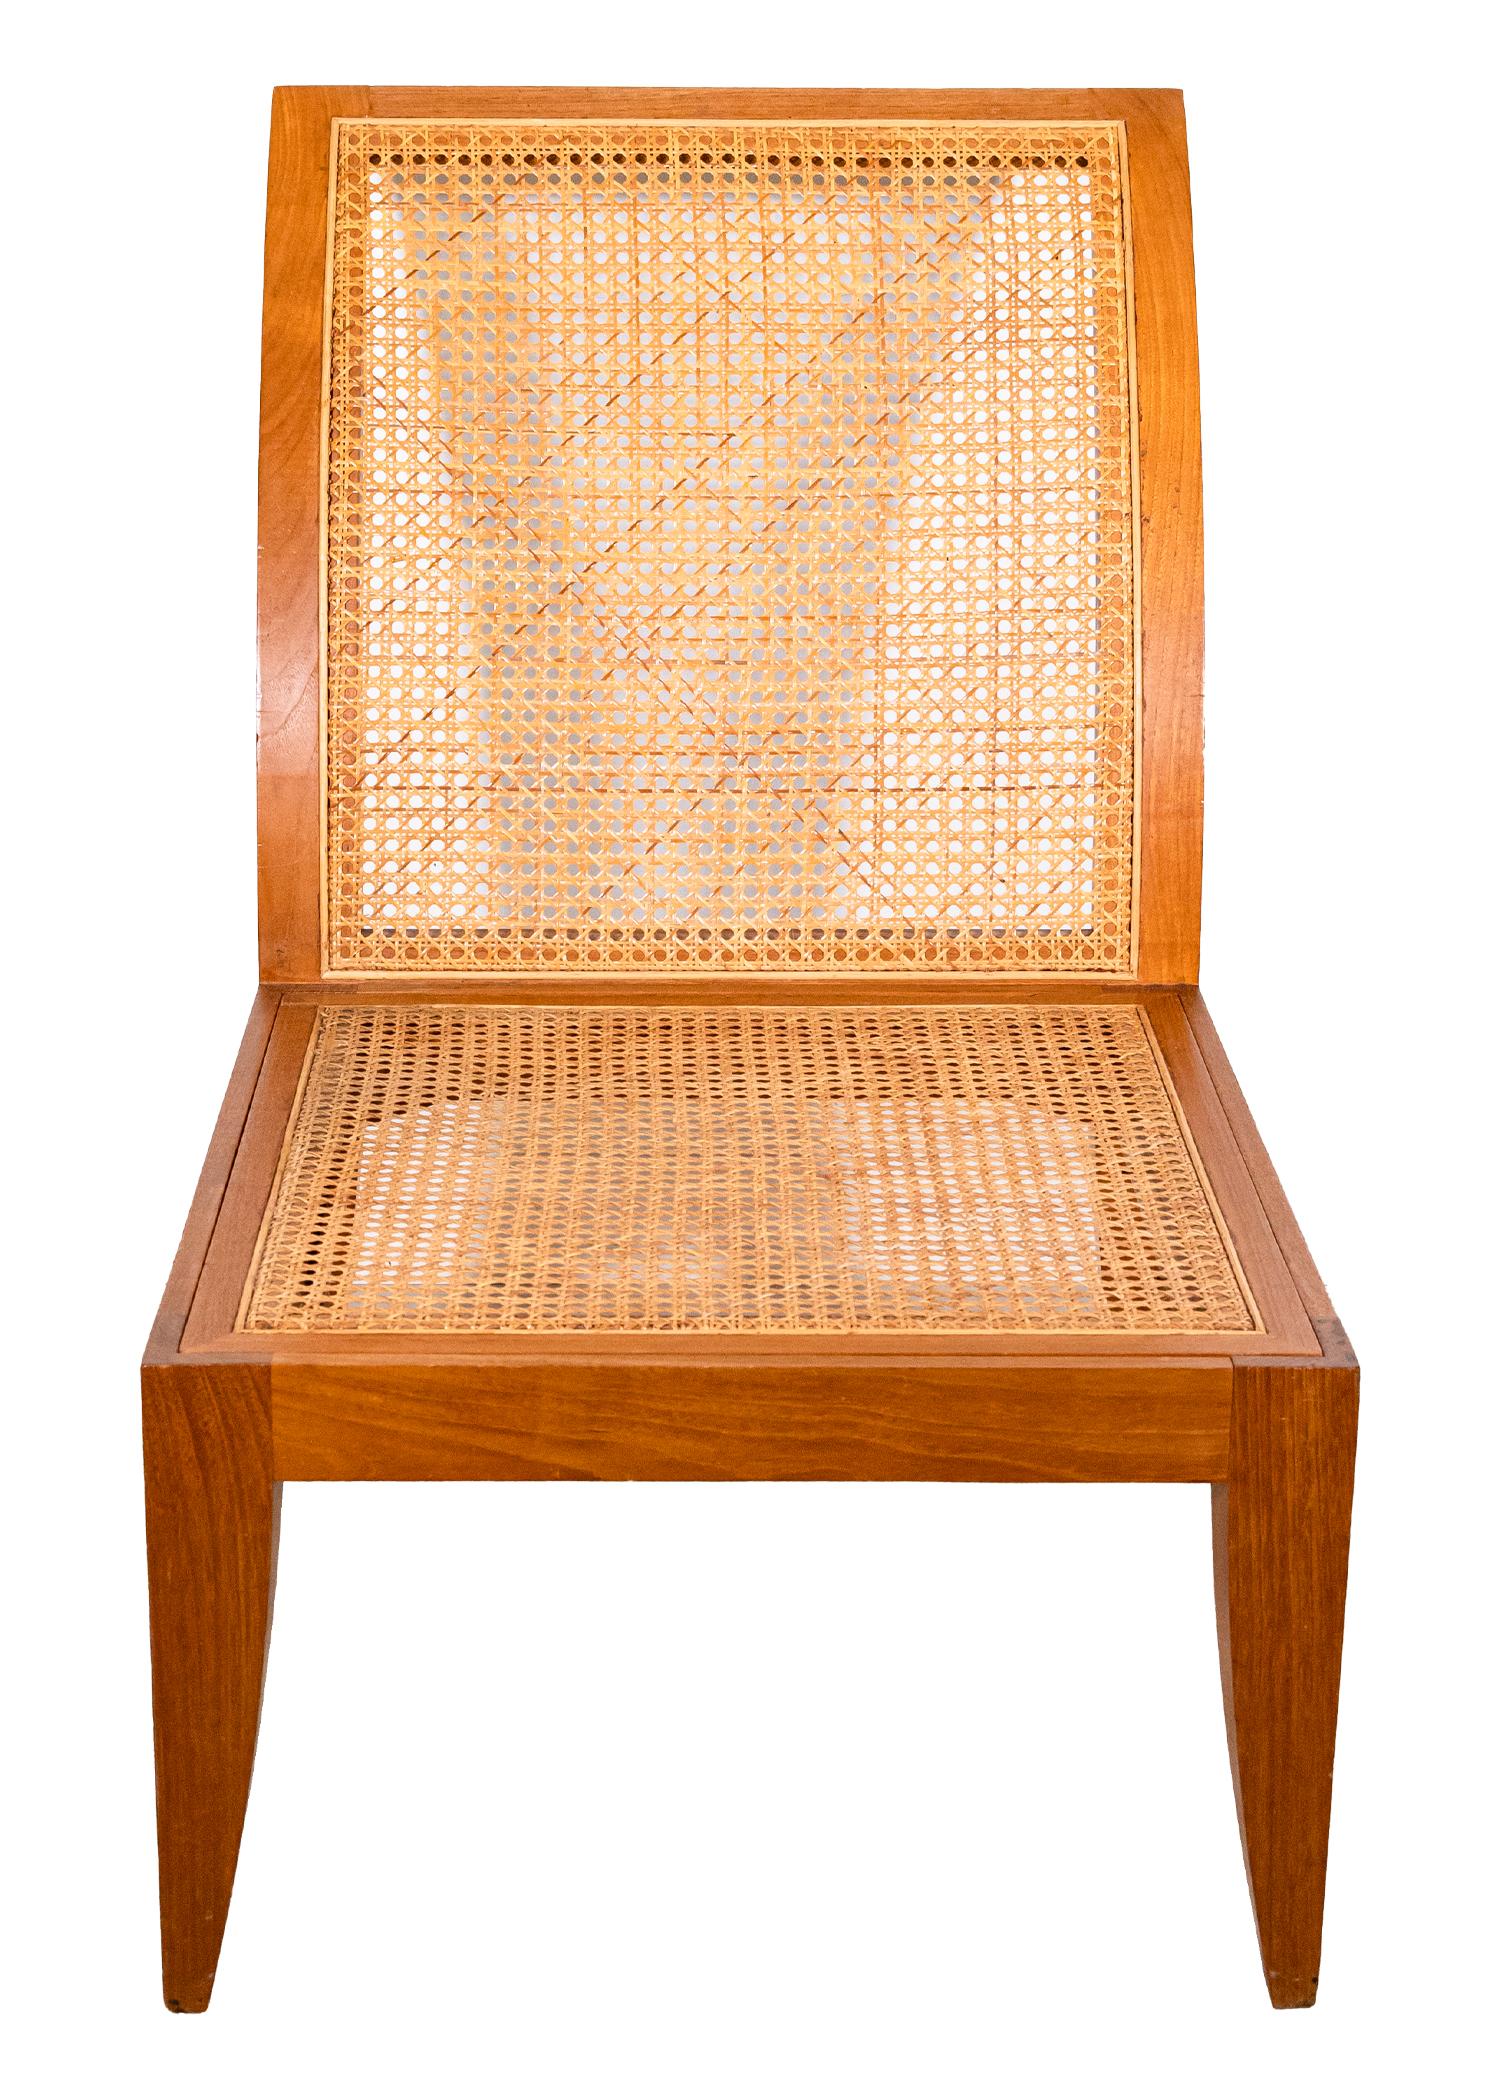 A Donghia rattan cane Jeanerret style chair. This unique accent chair has an incredible silhouette with its long, arching back, and its matching pointing legs. The chair is constructed with solid wood that has a semi-gloss finish, and a stunning